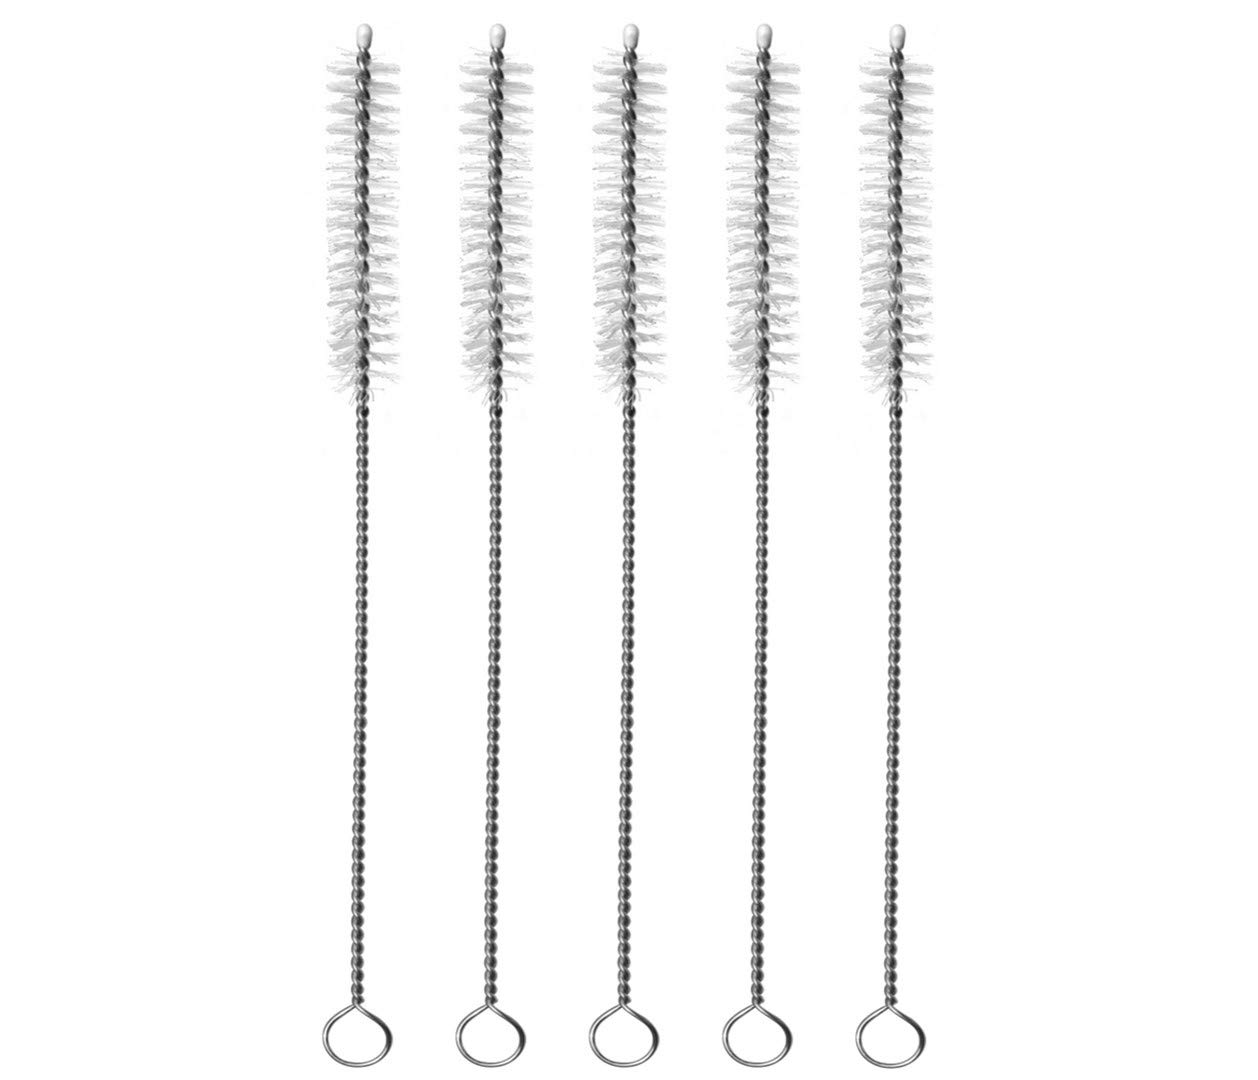 Axensory Set of 5 Straw Cleaner Brushes of 10 mm Diameter